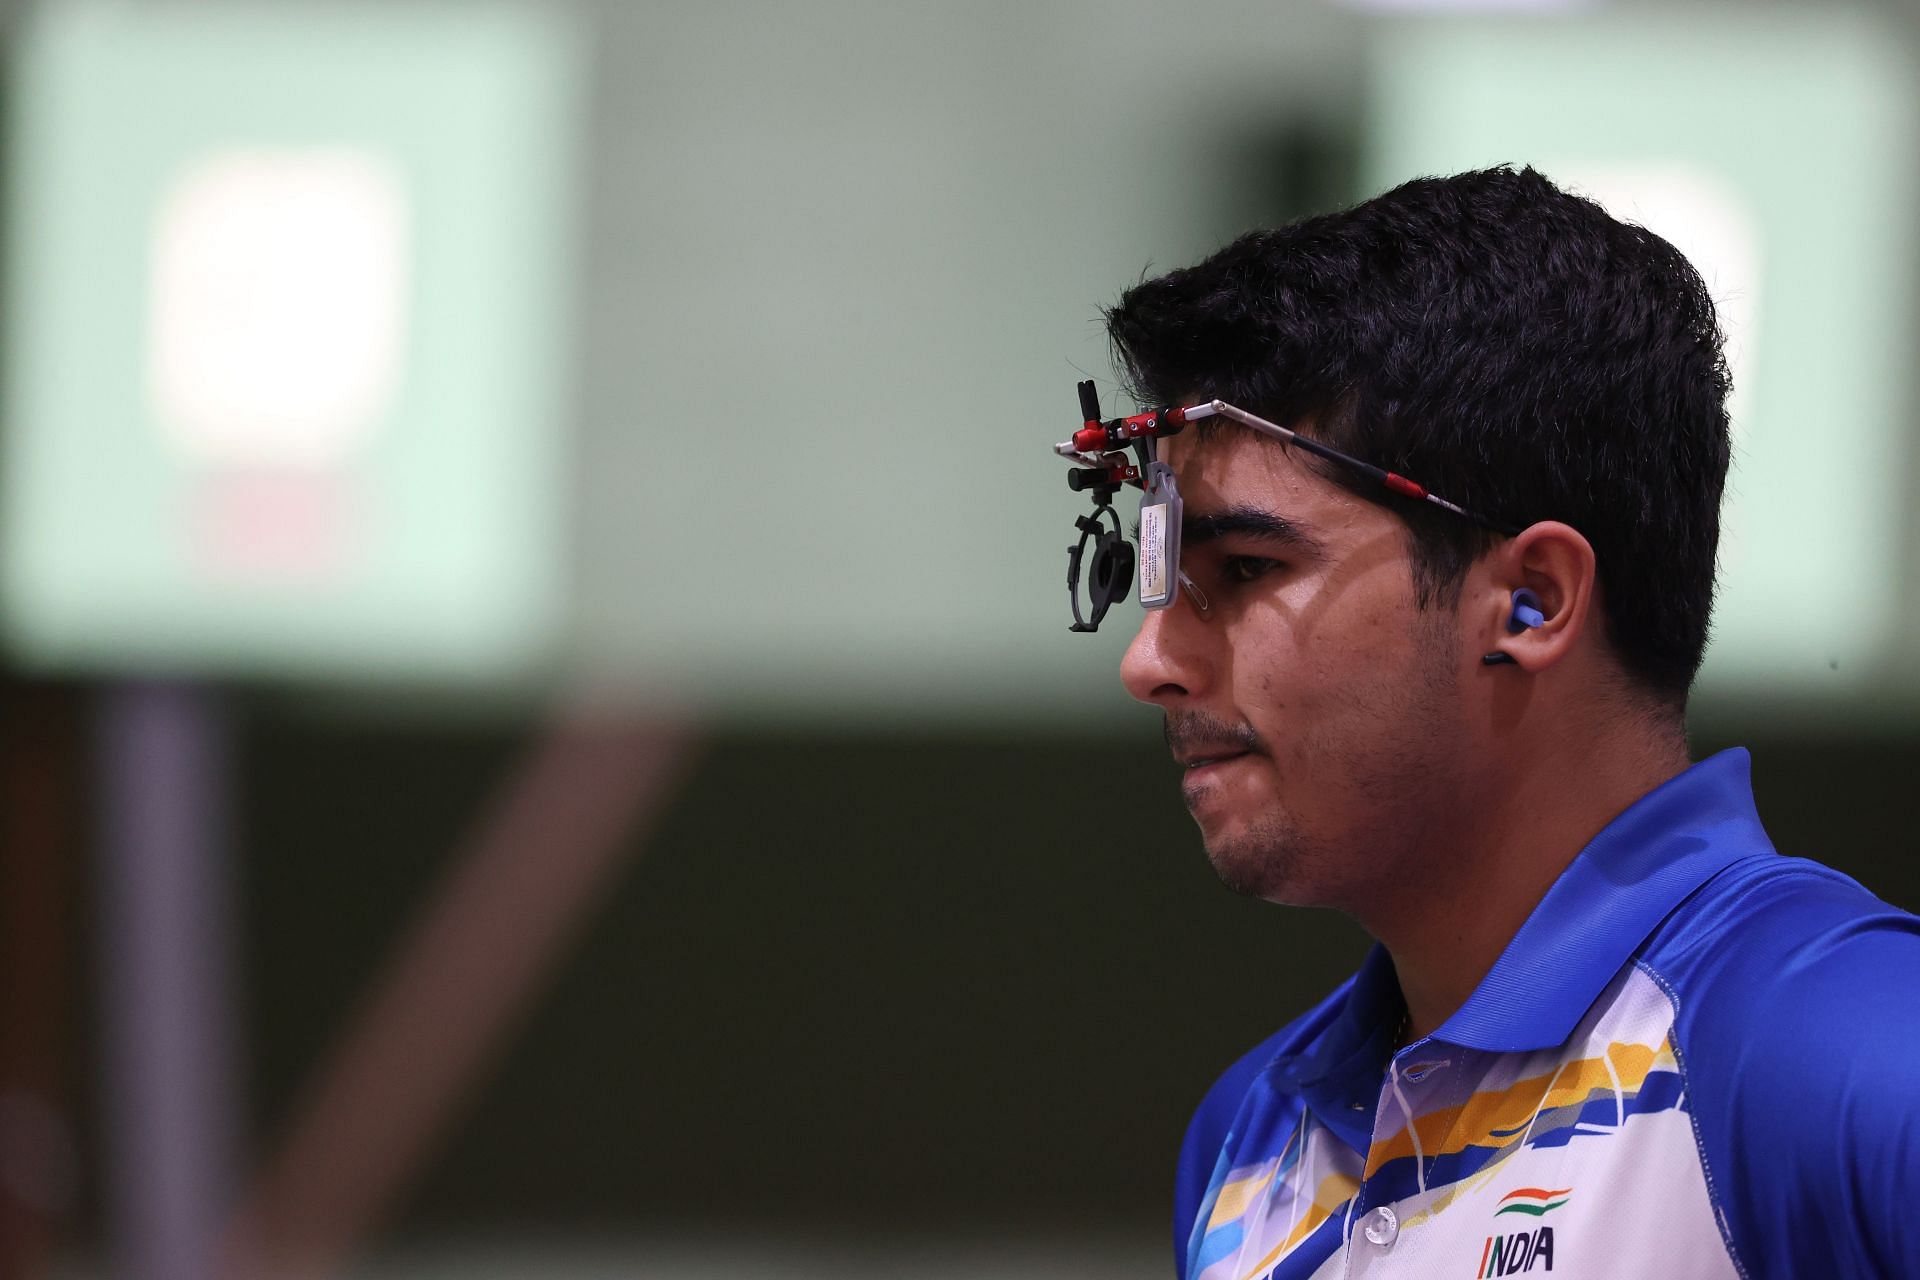 Saurabh Chaudhary wins gold at the 50m pistol event.